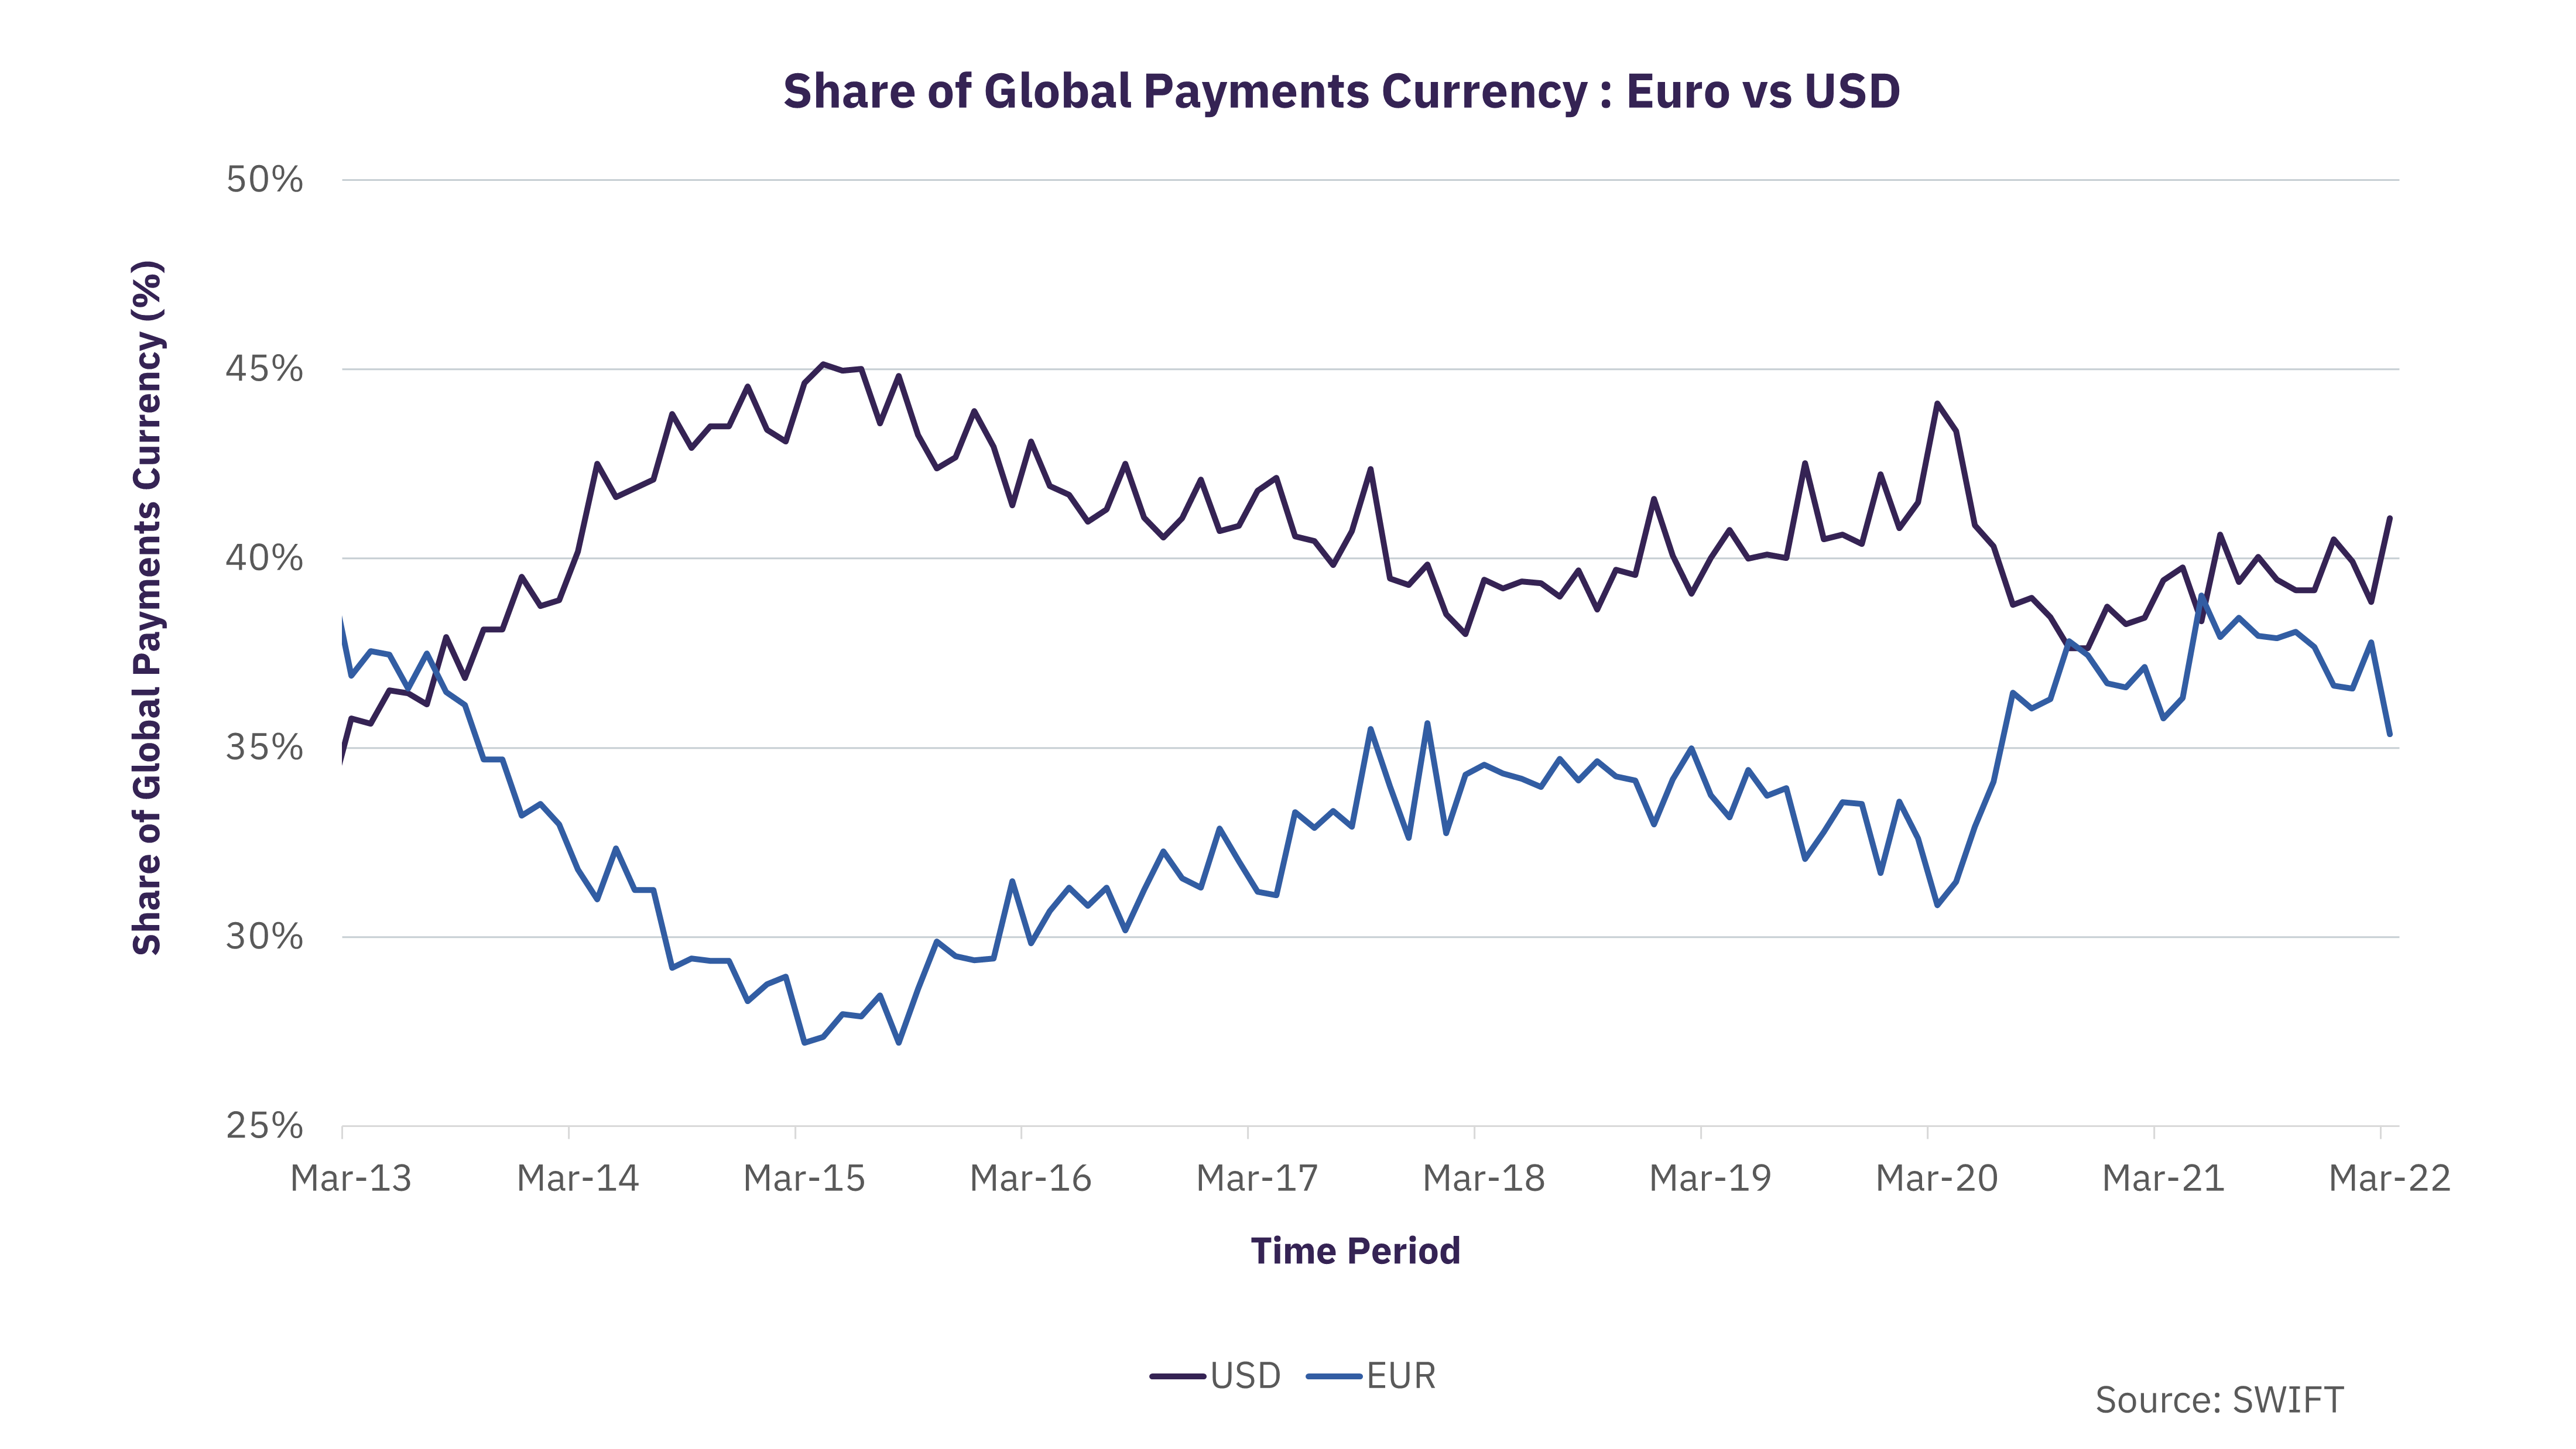 Global Payment Currency: The Euro Registered a Steep Fall - GlobalData